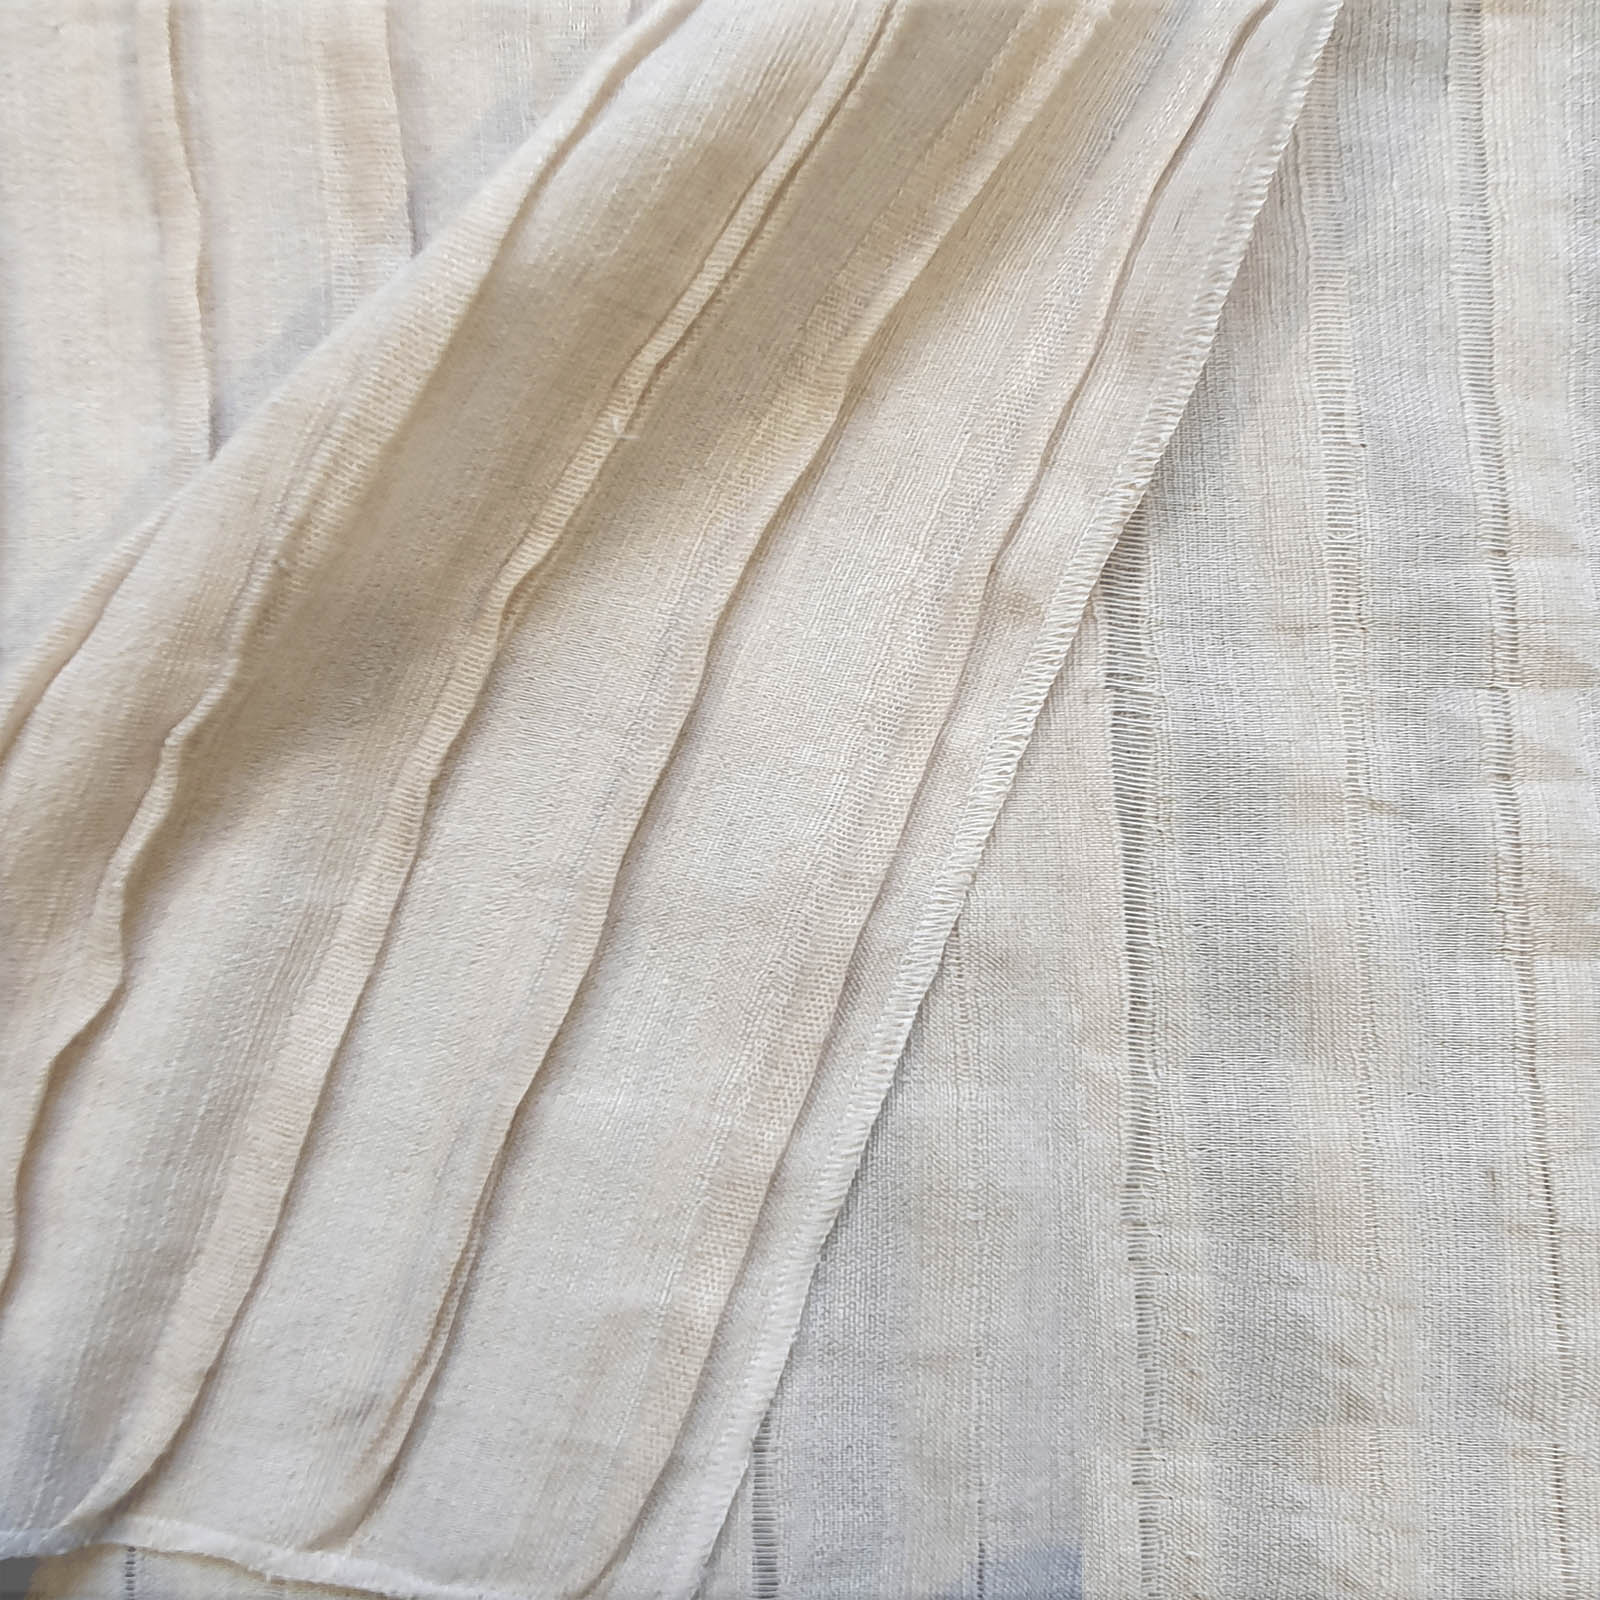 GP20229 PLISSE 75%LIN 27%PL W. 330CM
Linen blend jacquard 3d plisseè with sewing wffect.<br /> 100% Made in Italy fabric. Style modern and trendy with plain, jacquard structures, small drawings and stripes decorations.

 Treatments: antibacterial, embossing 3D effect and soft hand. Type of workings: jacquard and pleated. 